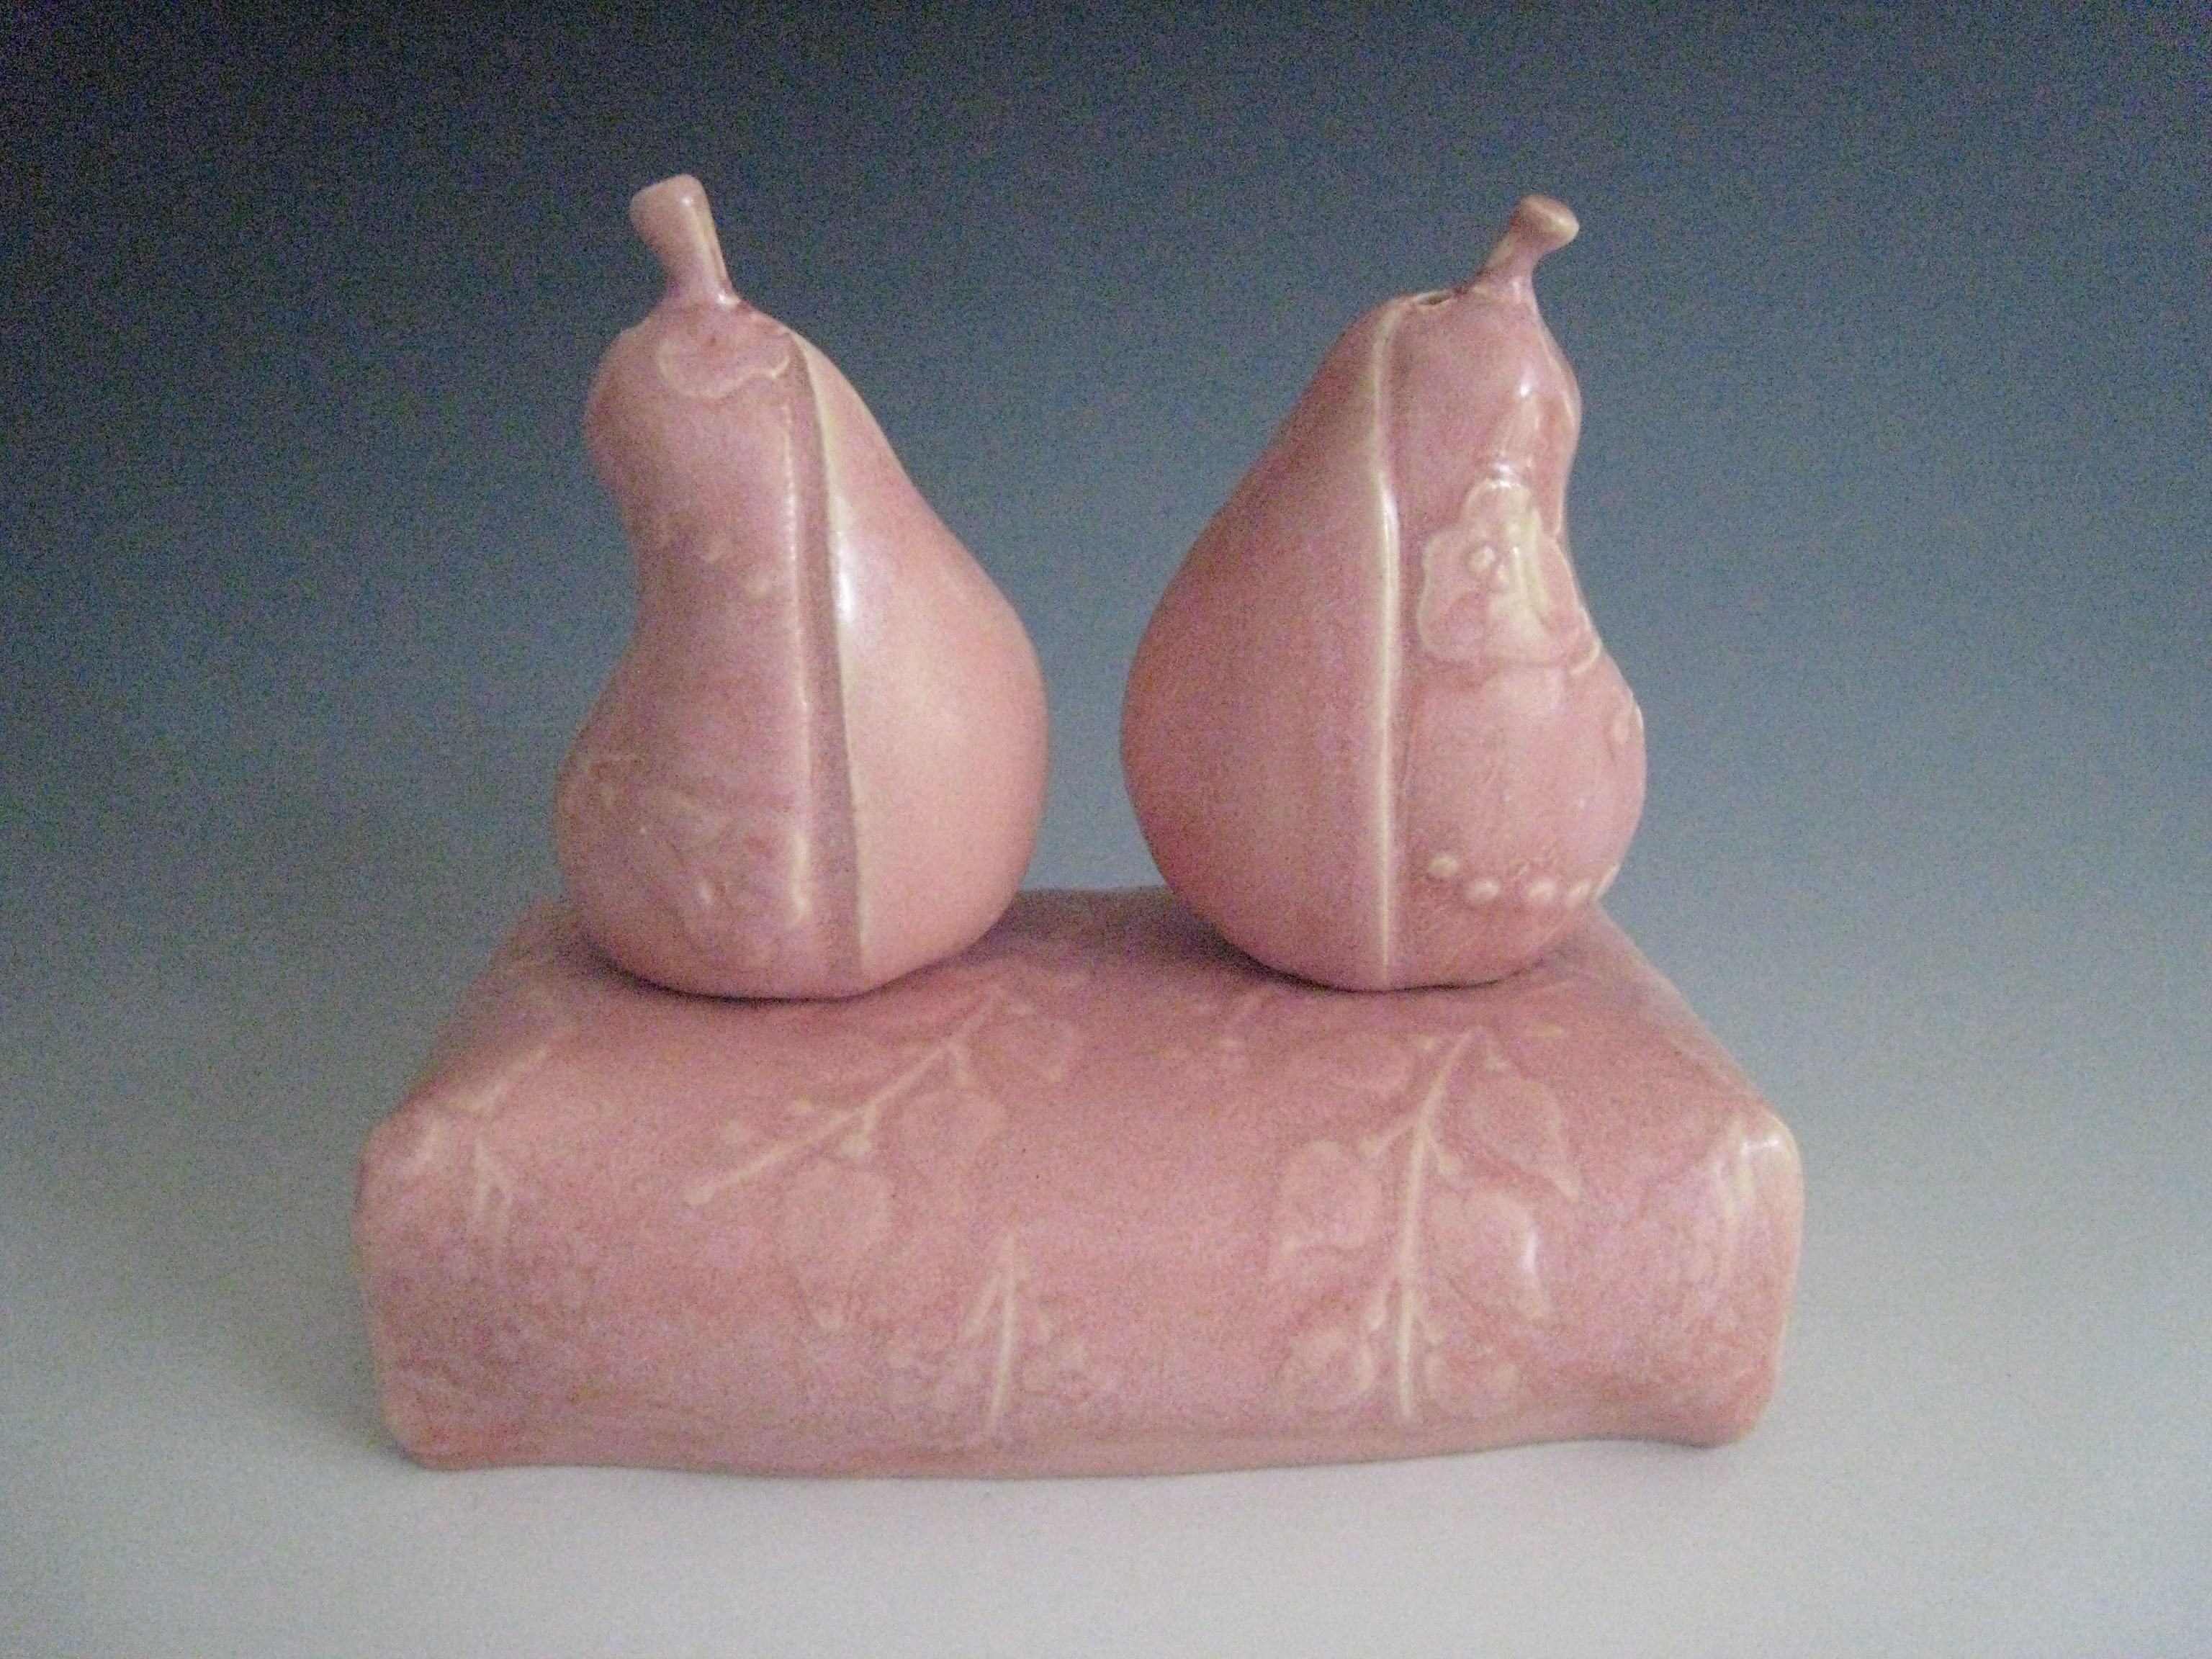 Pink pears on a cushion, 2011